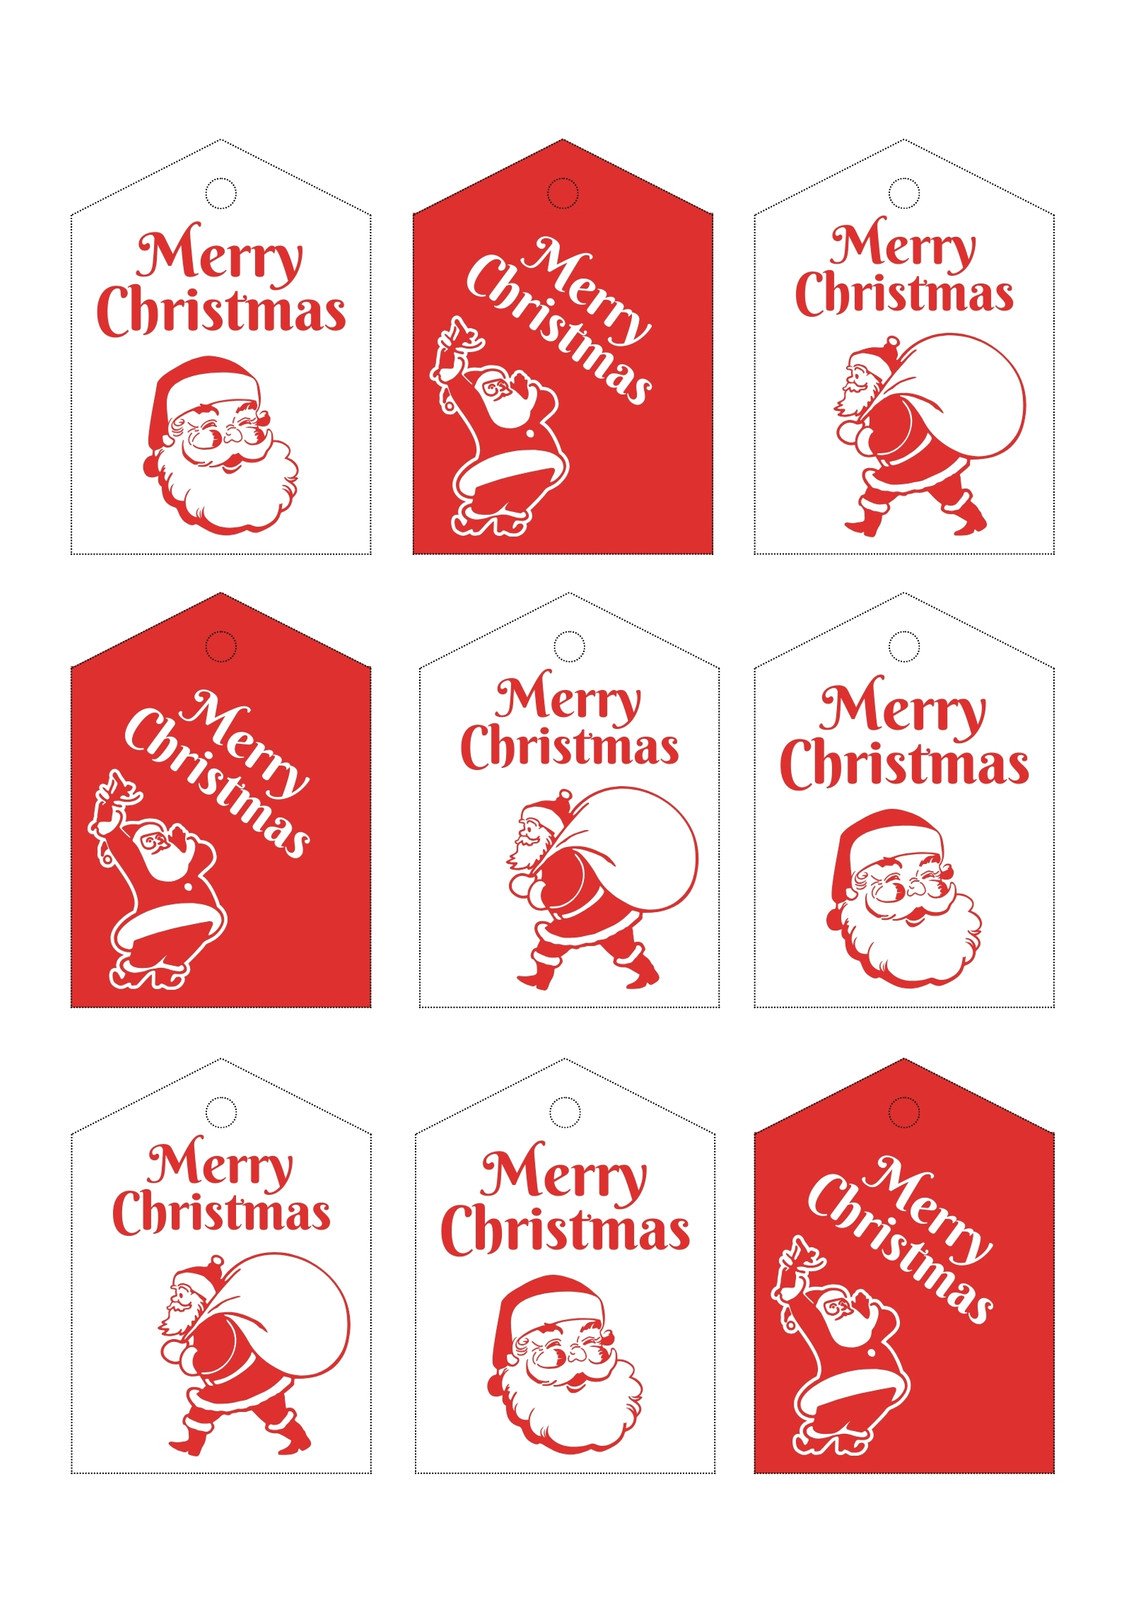 Merry Christmas mom Christmas gifts  Sticker for Sale by